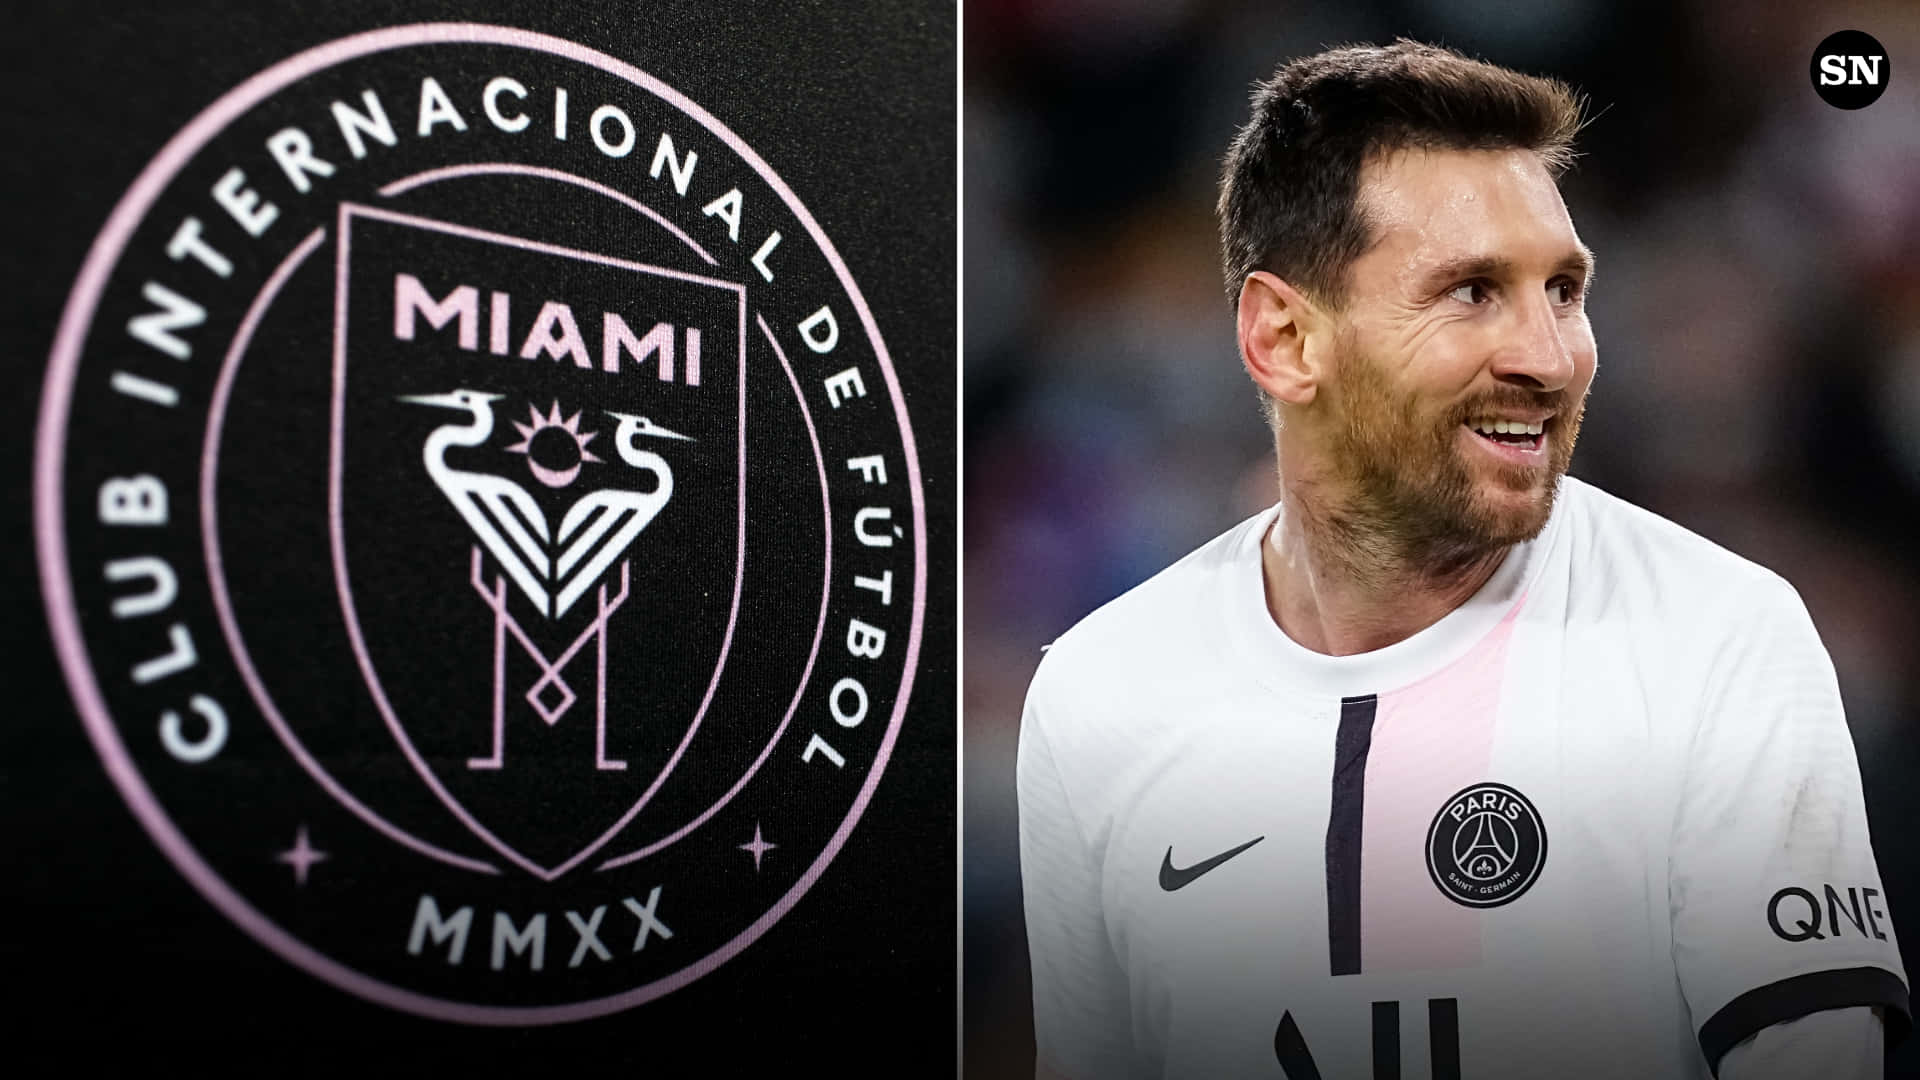 Download Inter Miami FC Logo And Argentine Footballer Lionel Messi Wallpapers